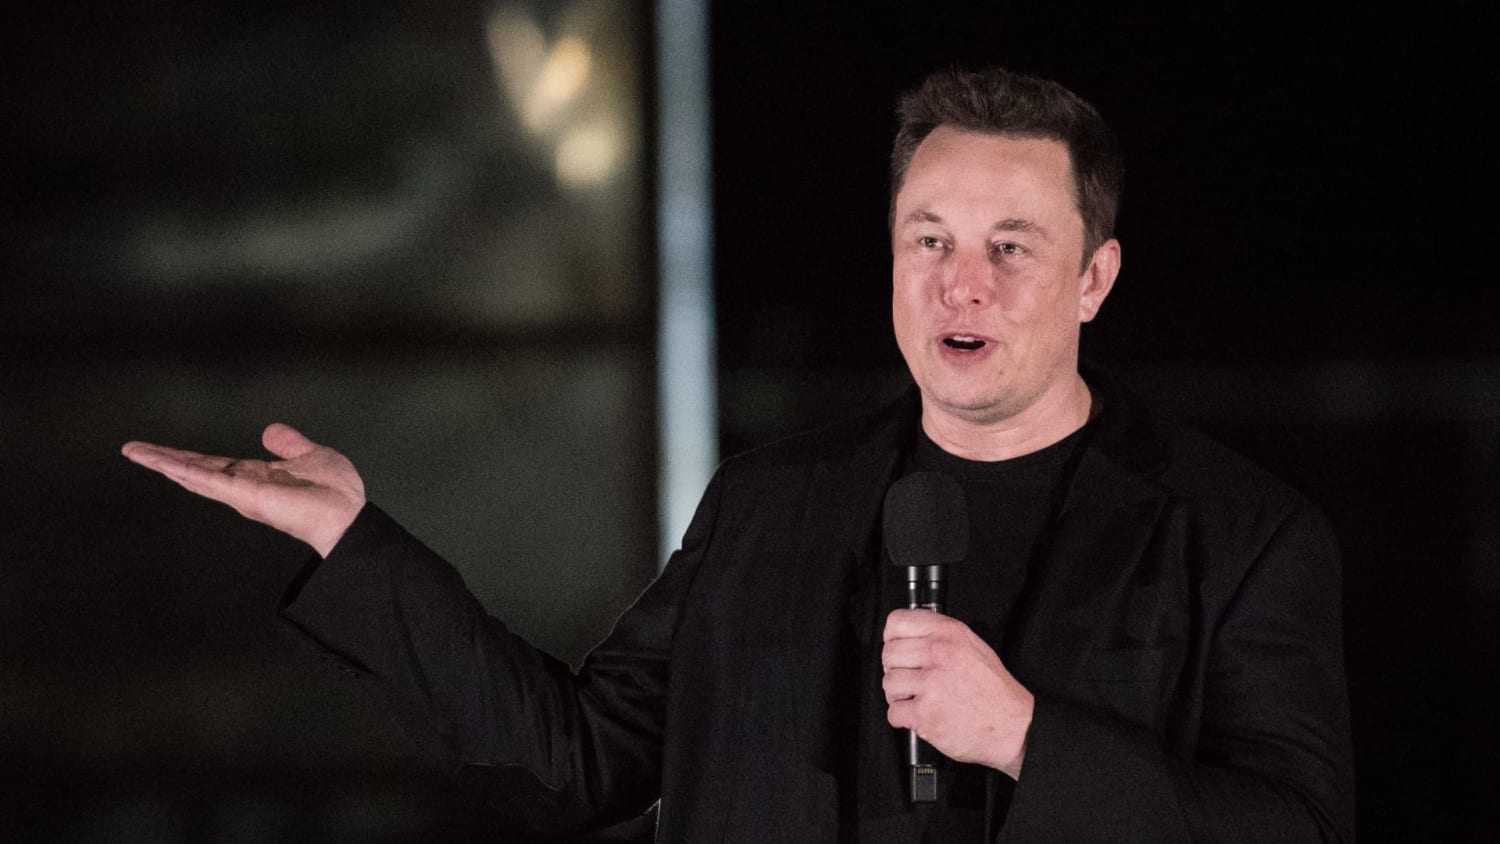 Elon Musk wants SpaceX to reach Mars so humanity is not a ‘single-planet species’